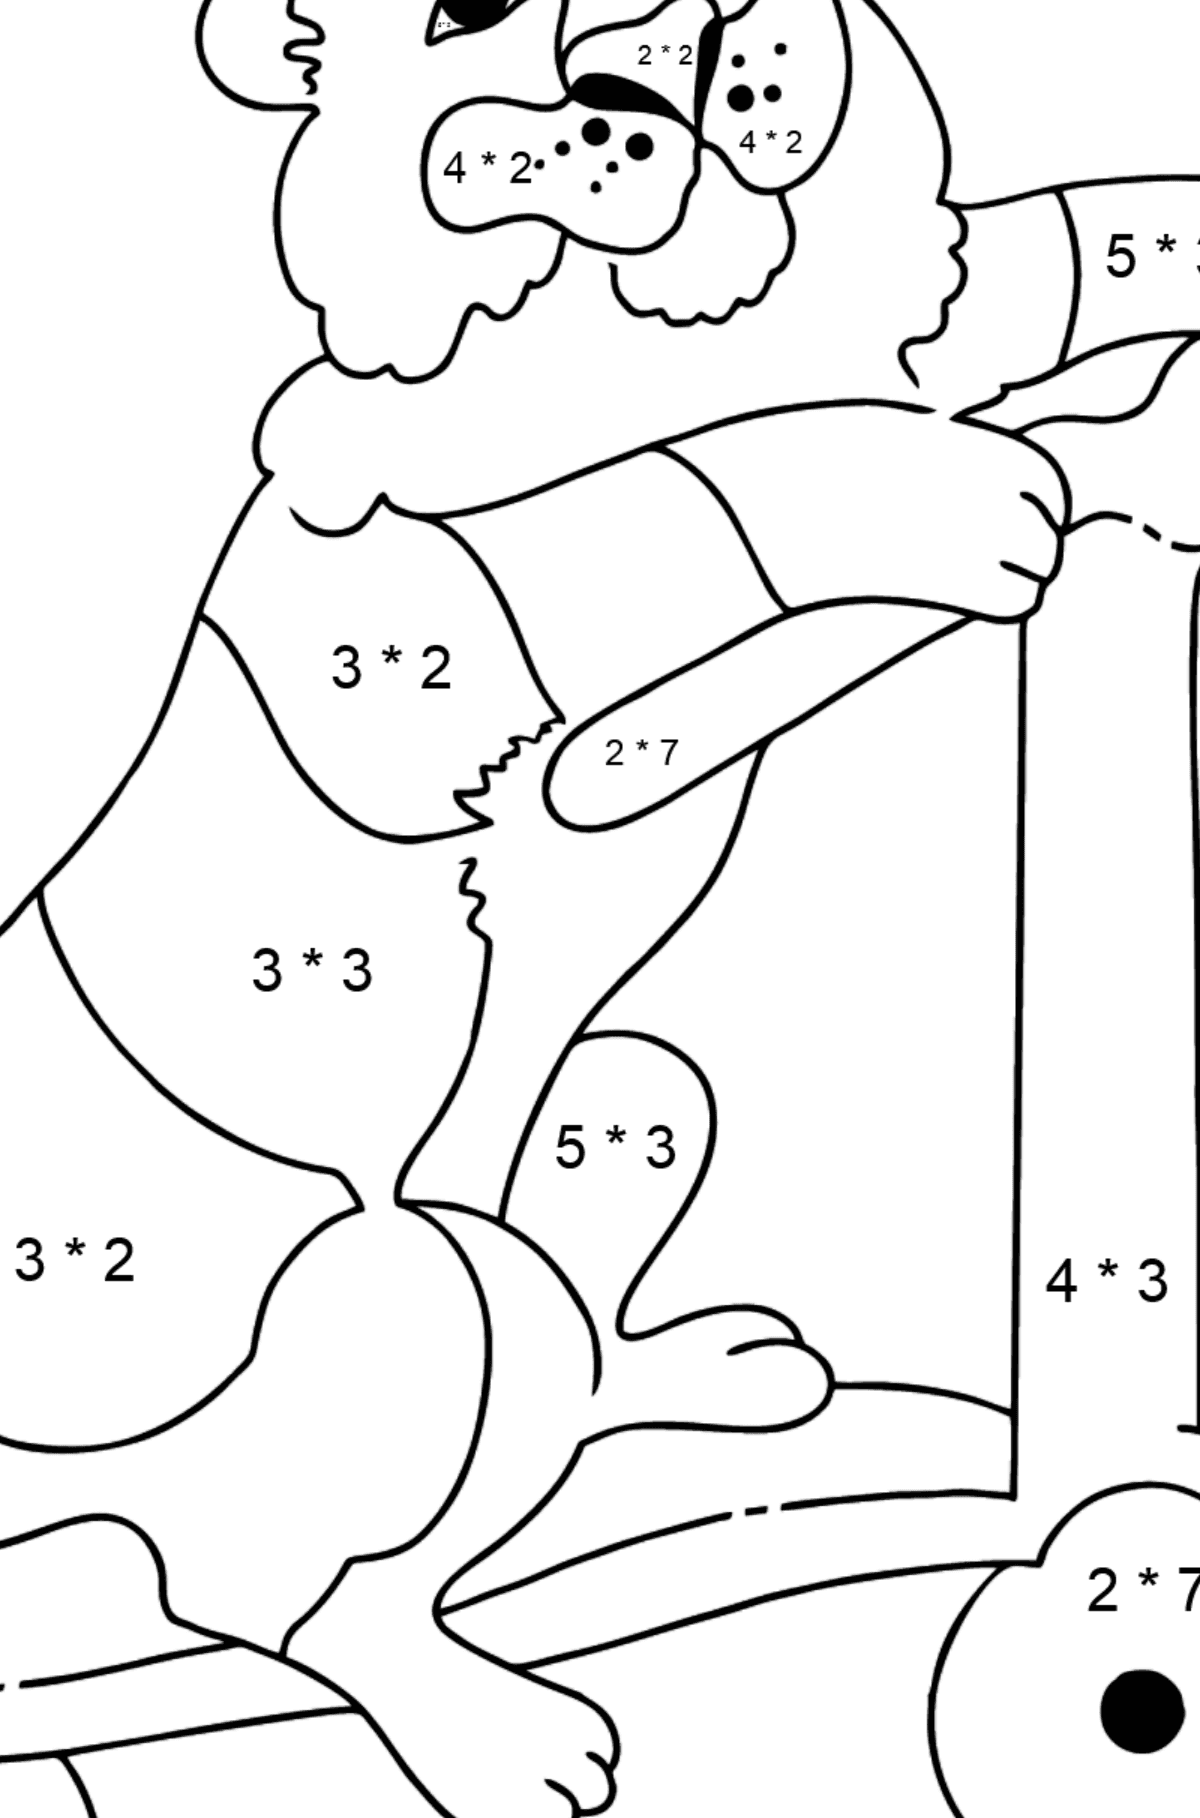 Coloring Page - A Tiger is Learning to Ride a Scooter - Math Coloring - Multiplication for Kids